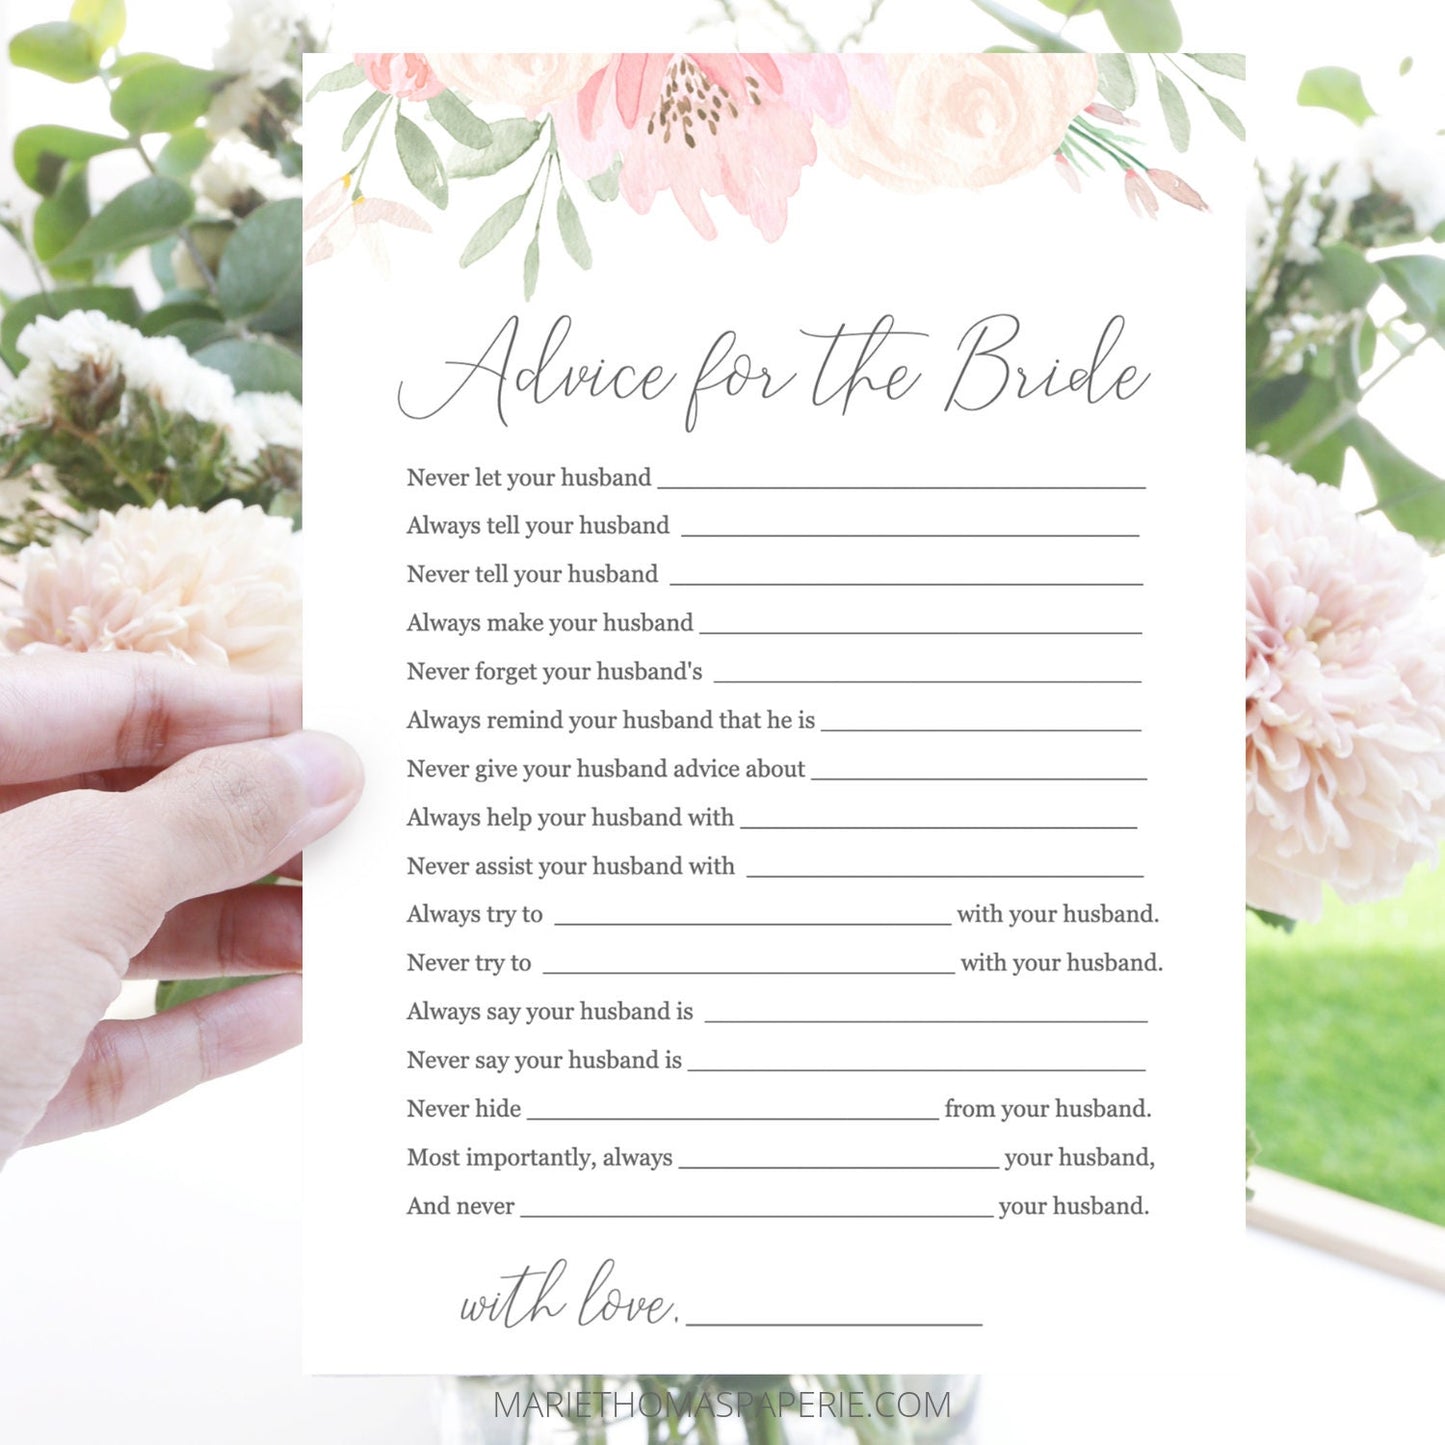 Editable Bridal Shower Games Wedding Advice Cards Advice for the Bride Template